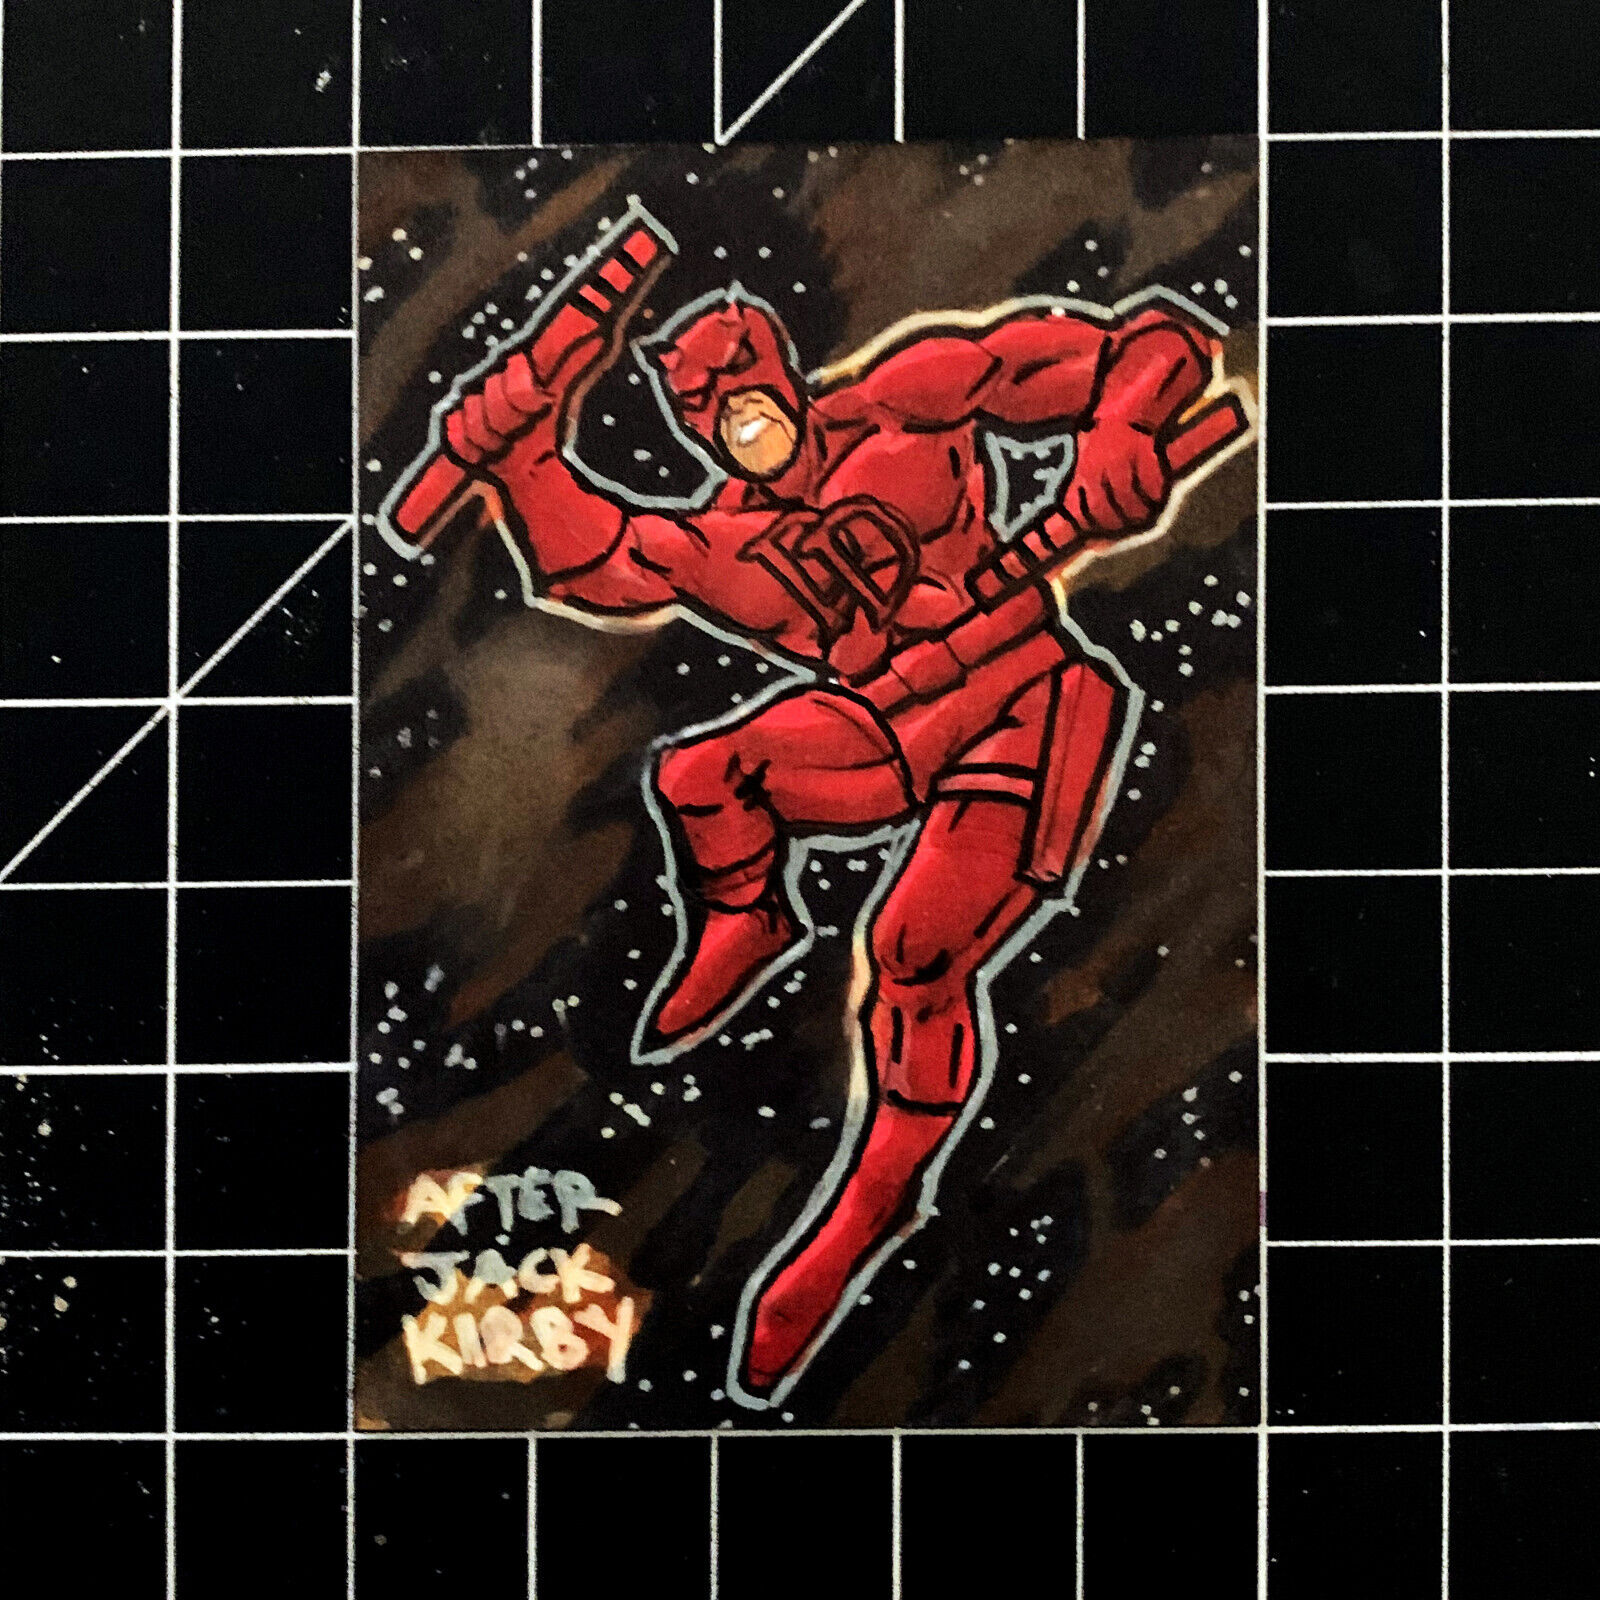 1 of 1 Extremely Rare Sketch Card of Daredevil by Dante H Guerra Very Hot